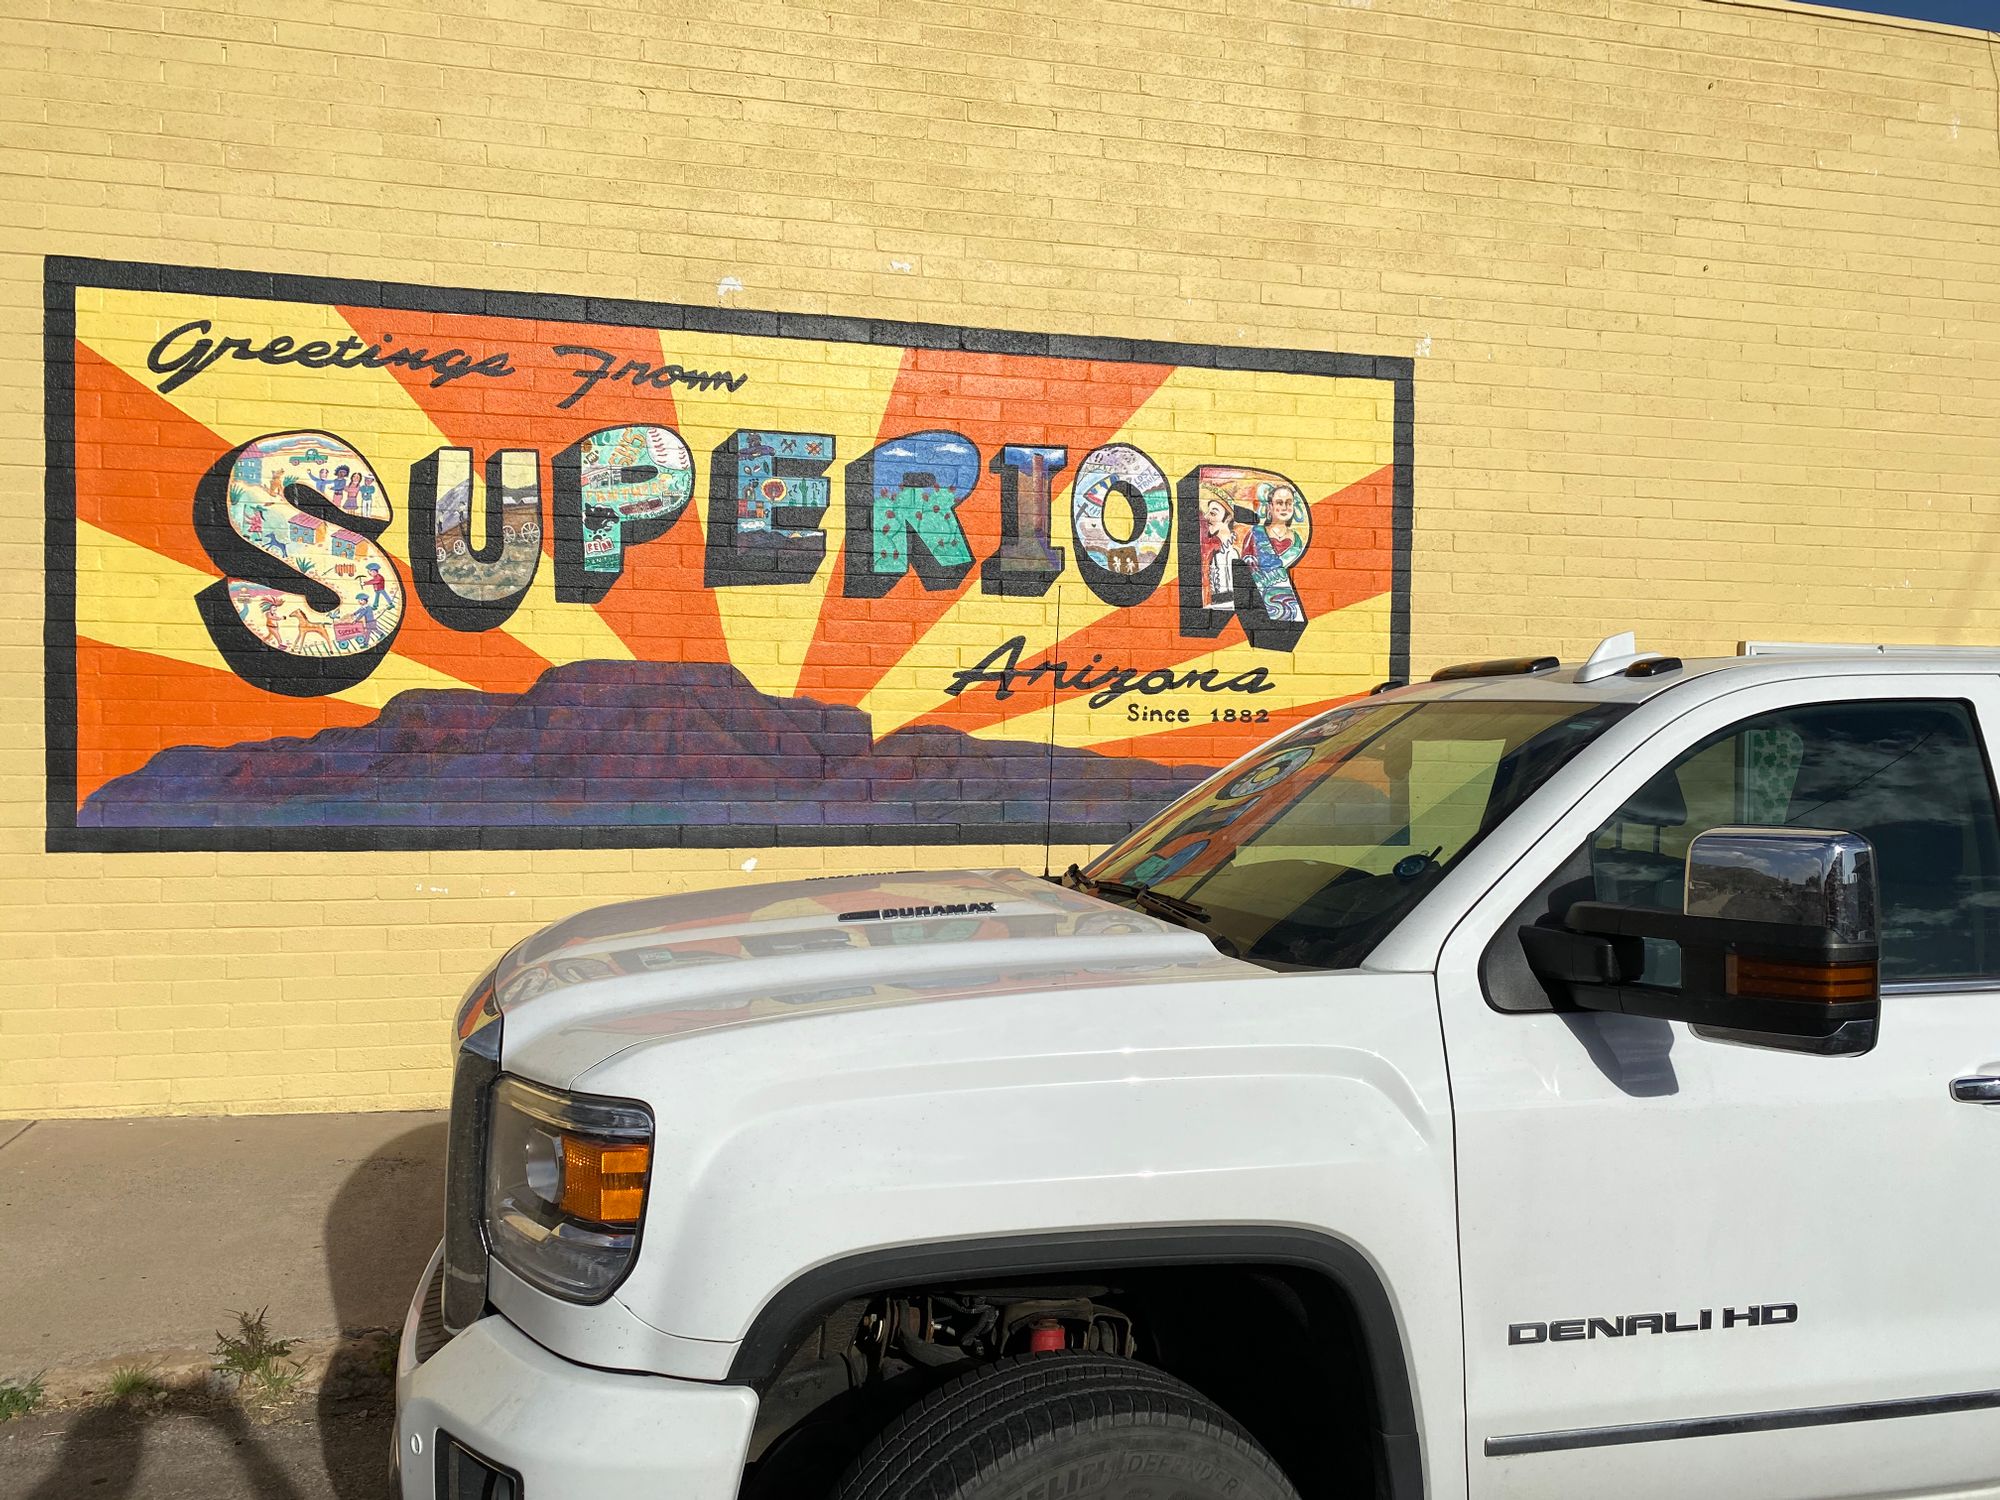 Exploring Superior, Arizona and Driving to Our First National Park